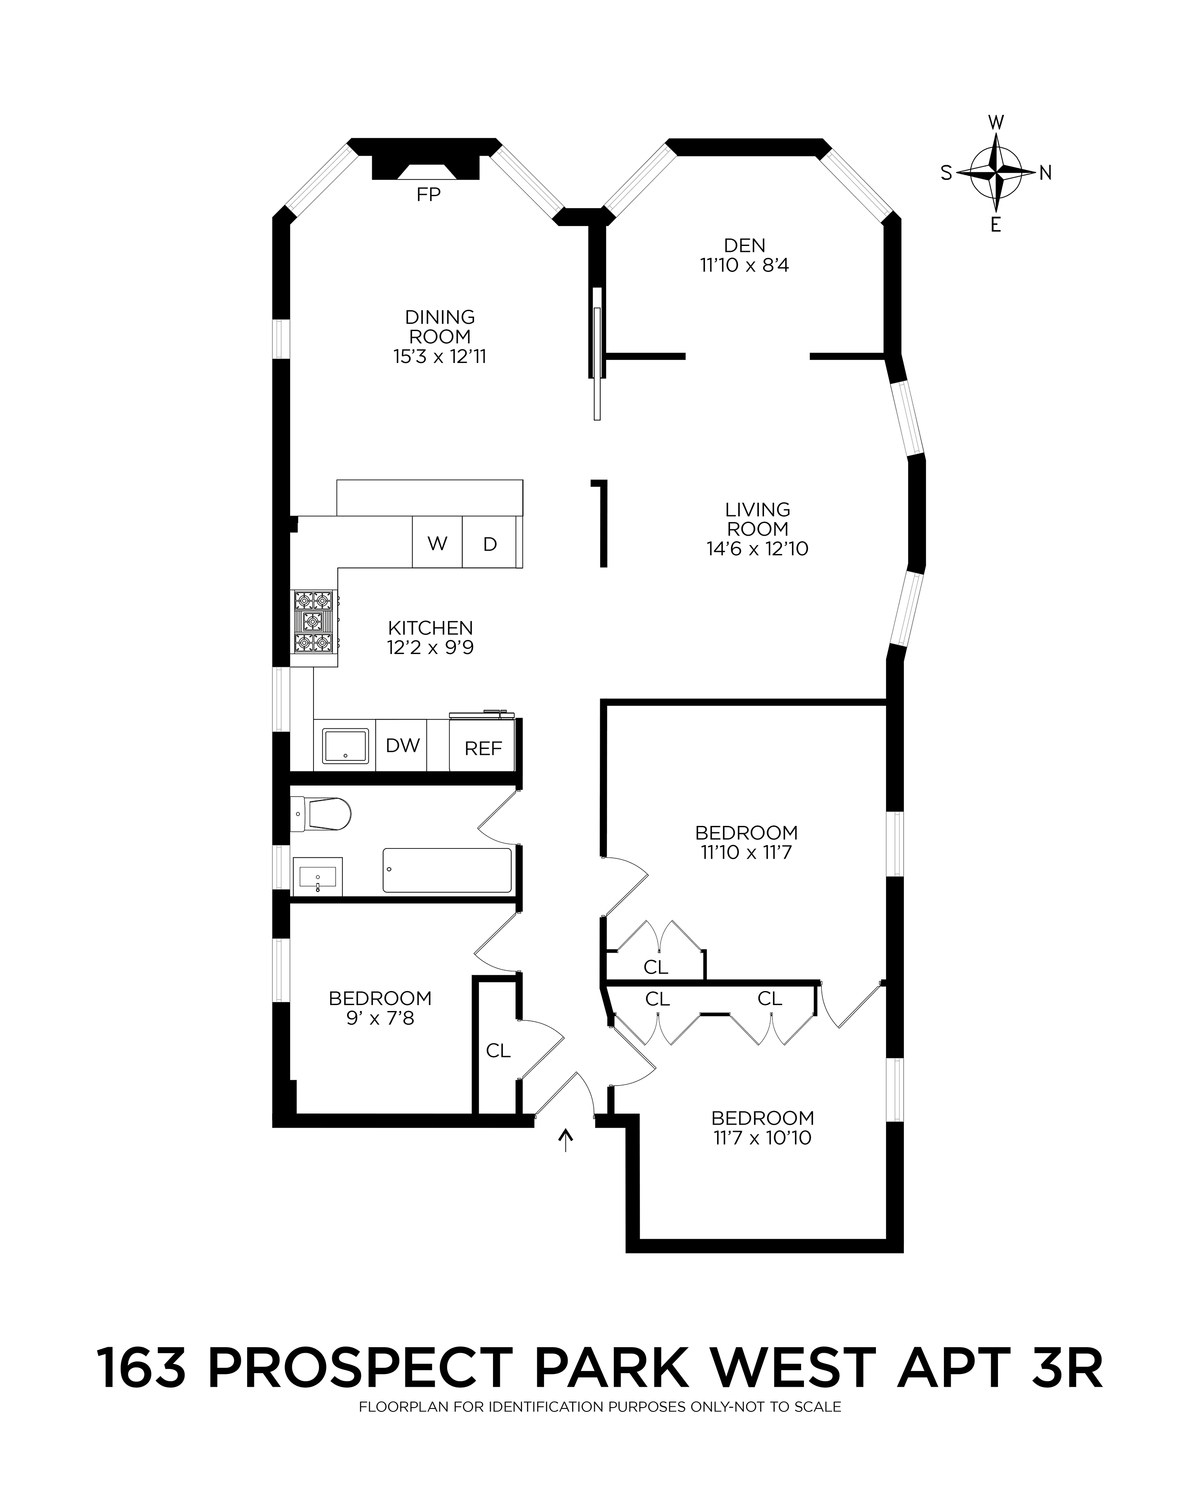 floorplan with bedrooms near entry and living at other end